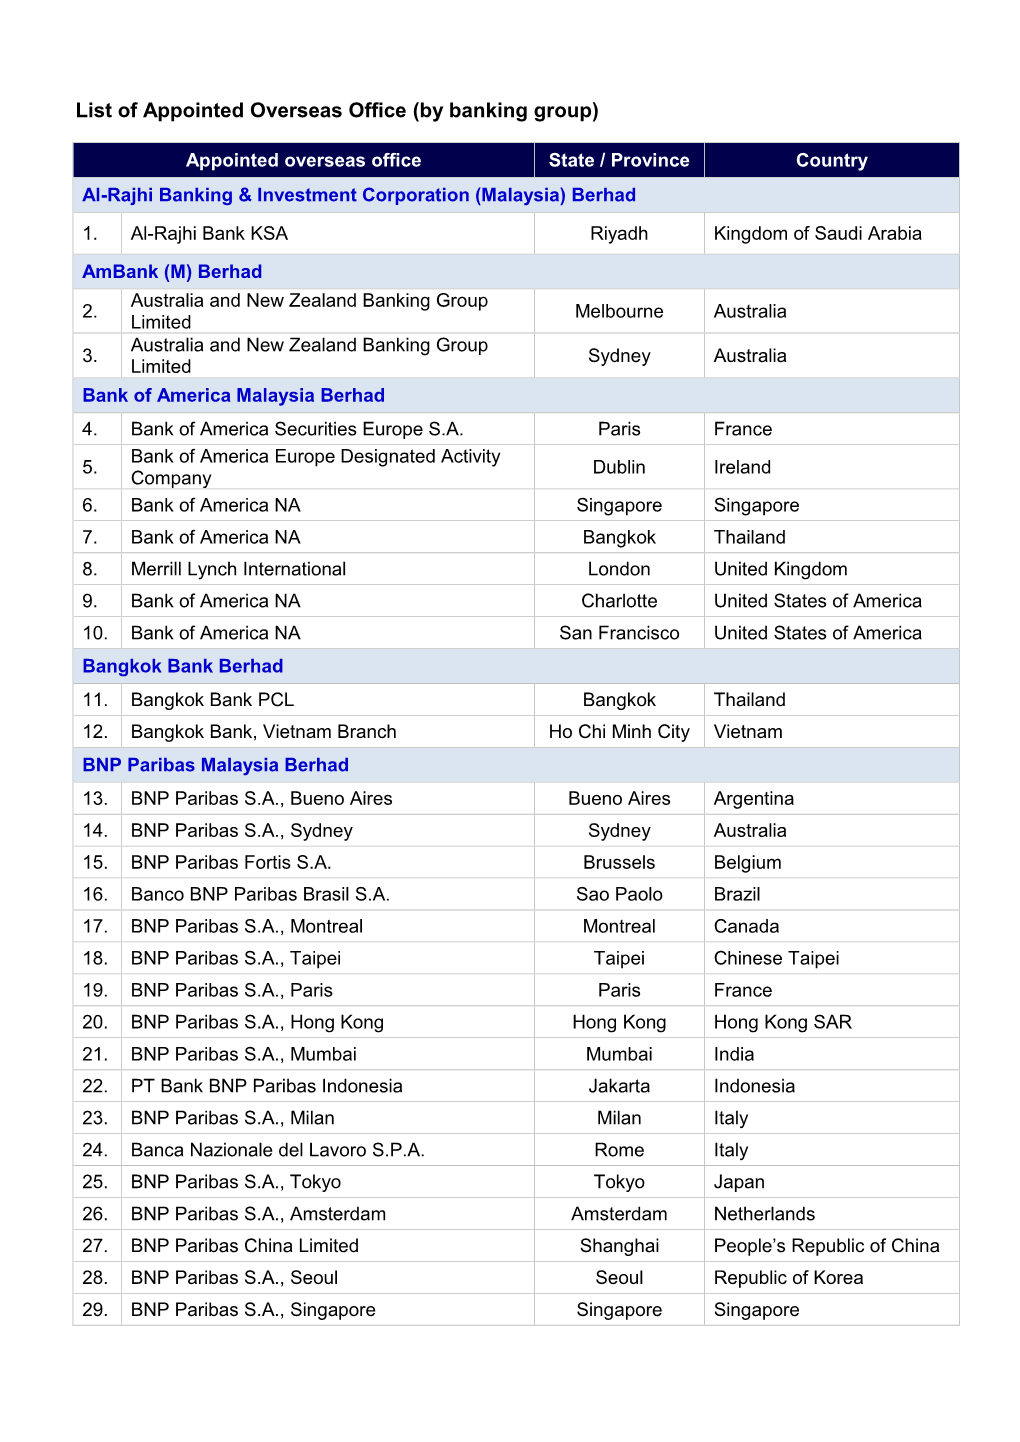 List of Appointed Overseas Office (By Banking Group)